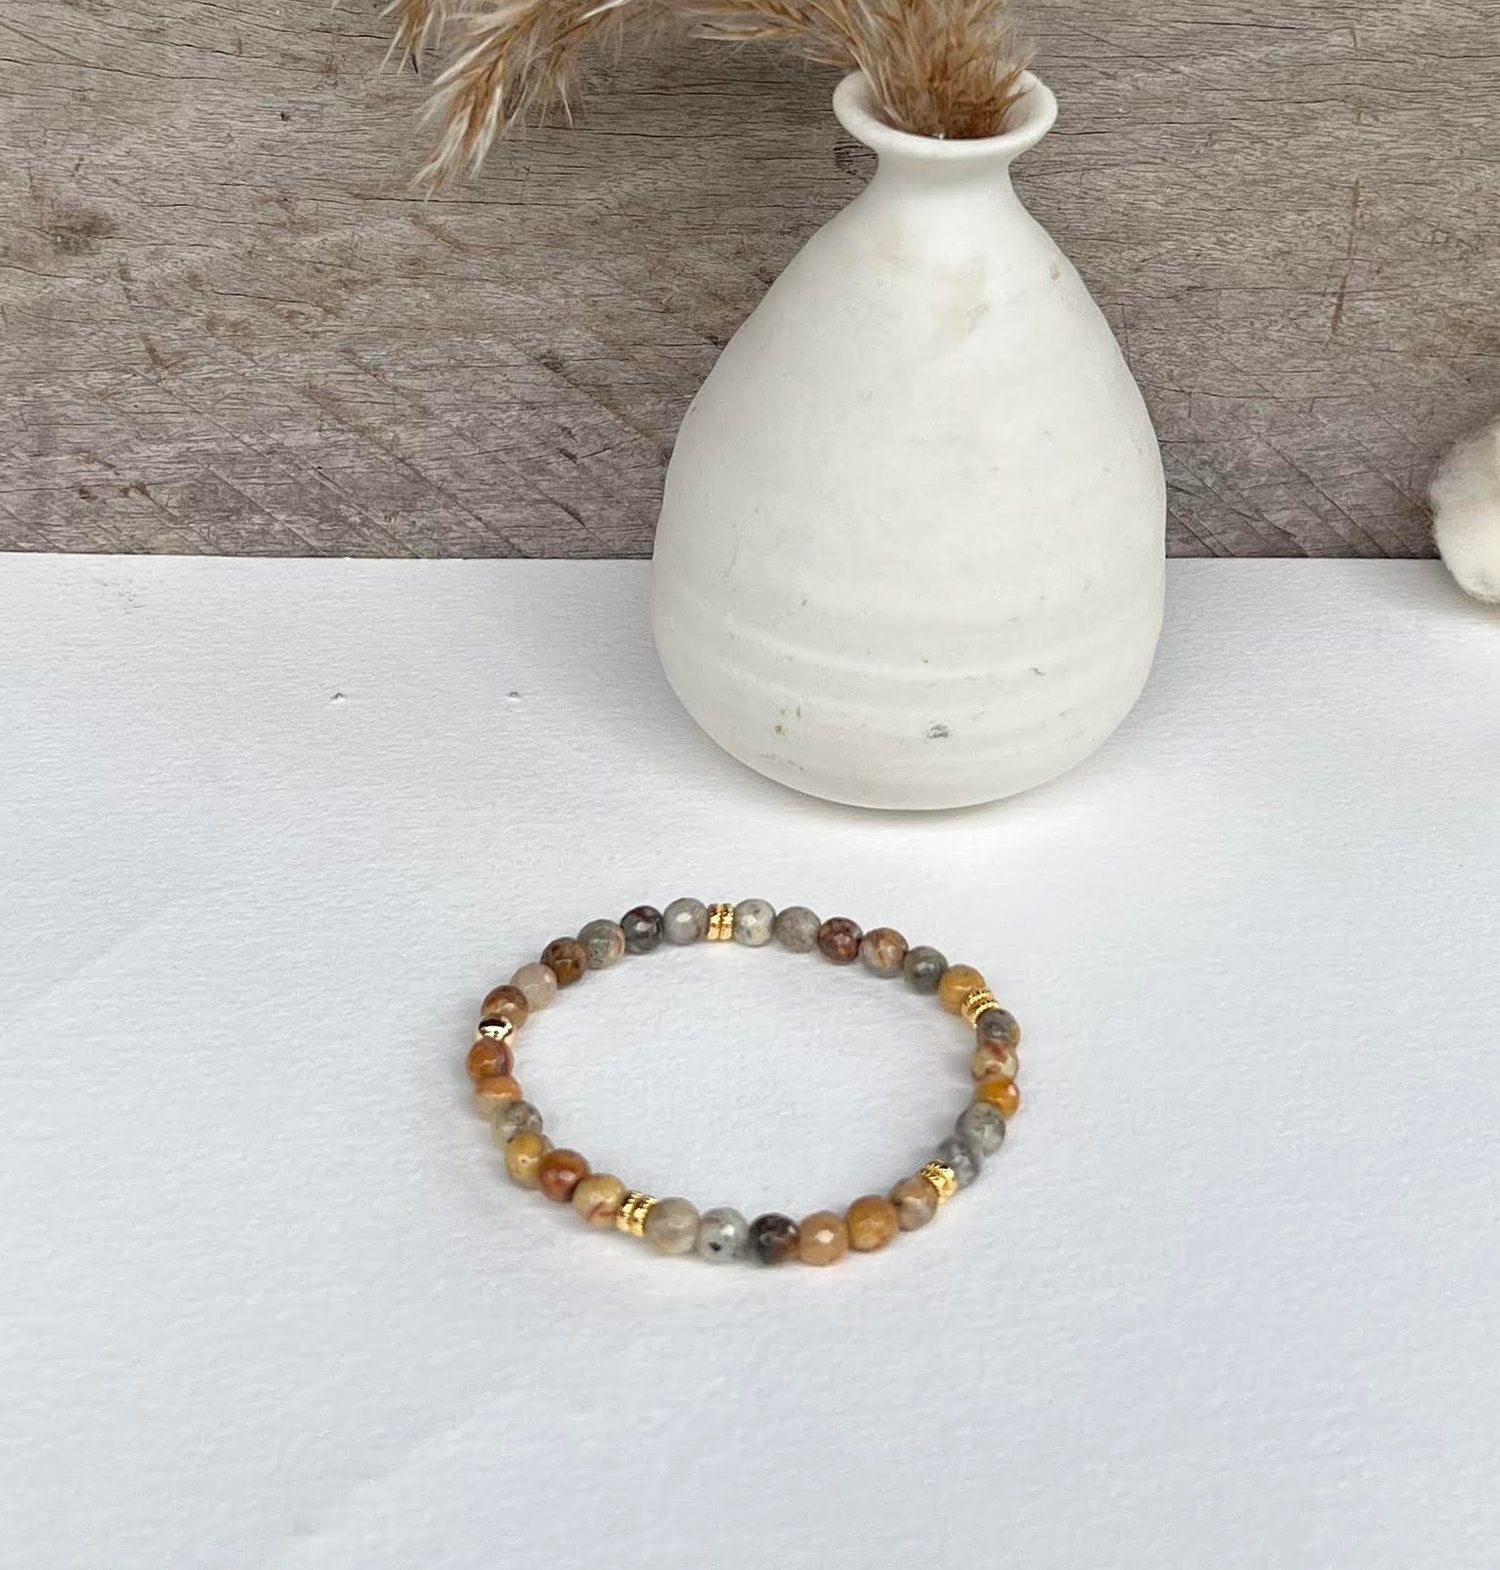 Mill & Hide - Lisa B Jewellery - Agate and Gold Bracelet